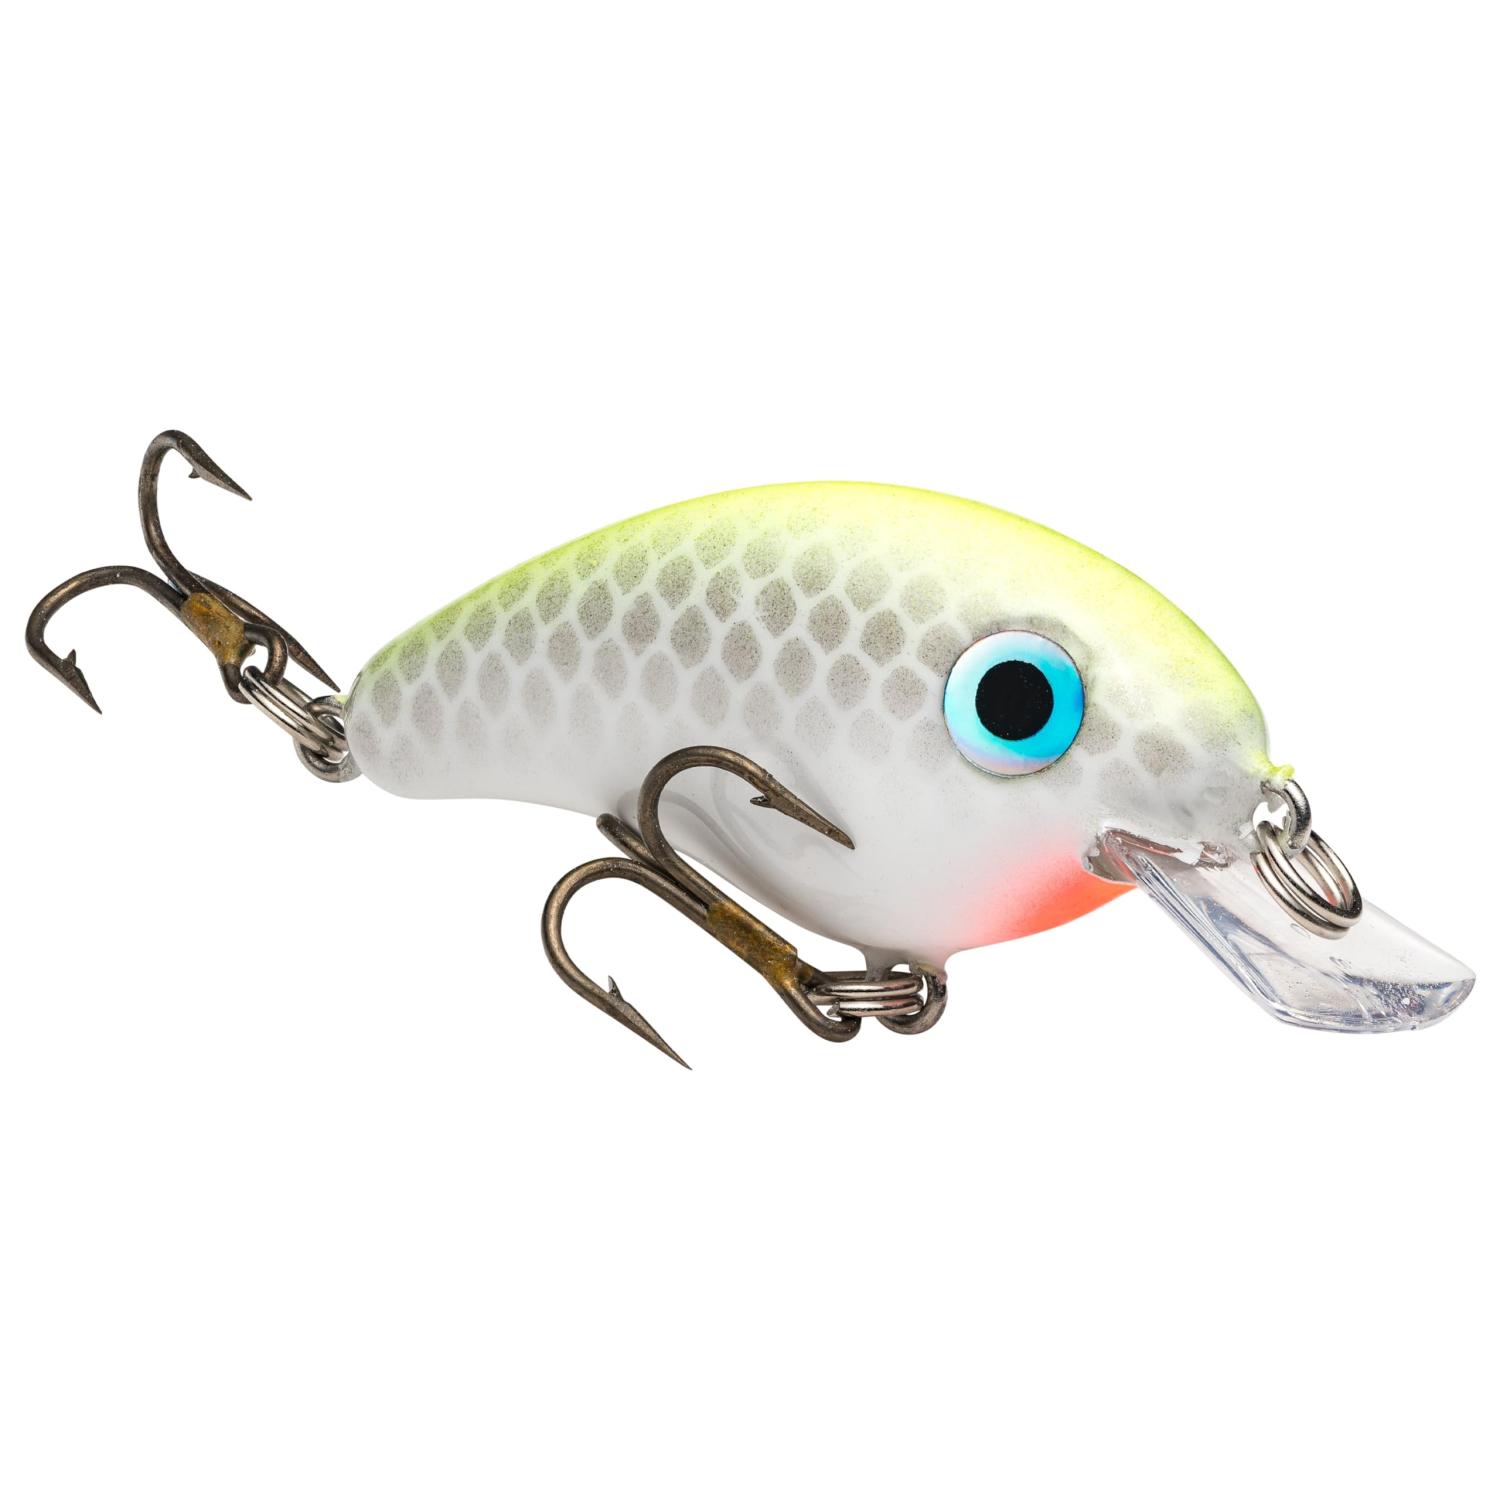 Strike King (HCBPM-501) Bitsy Pond Minnow Crankbait Fishing Lure 501 -  Chartreuse Back/Pearl Belly 3/32 oz Irresistible to Fish